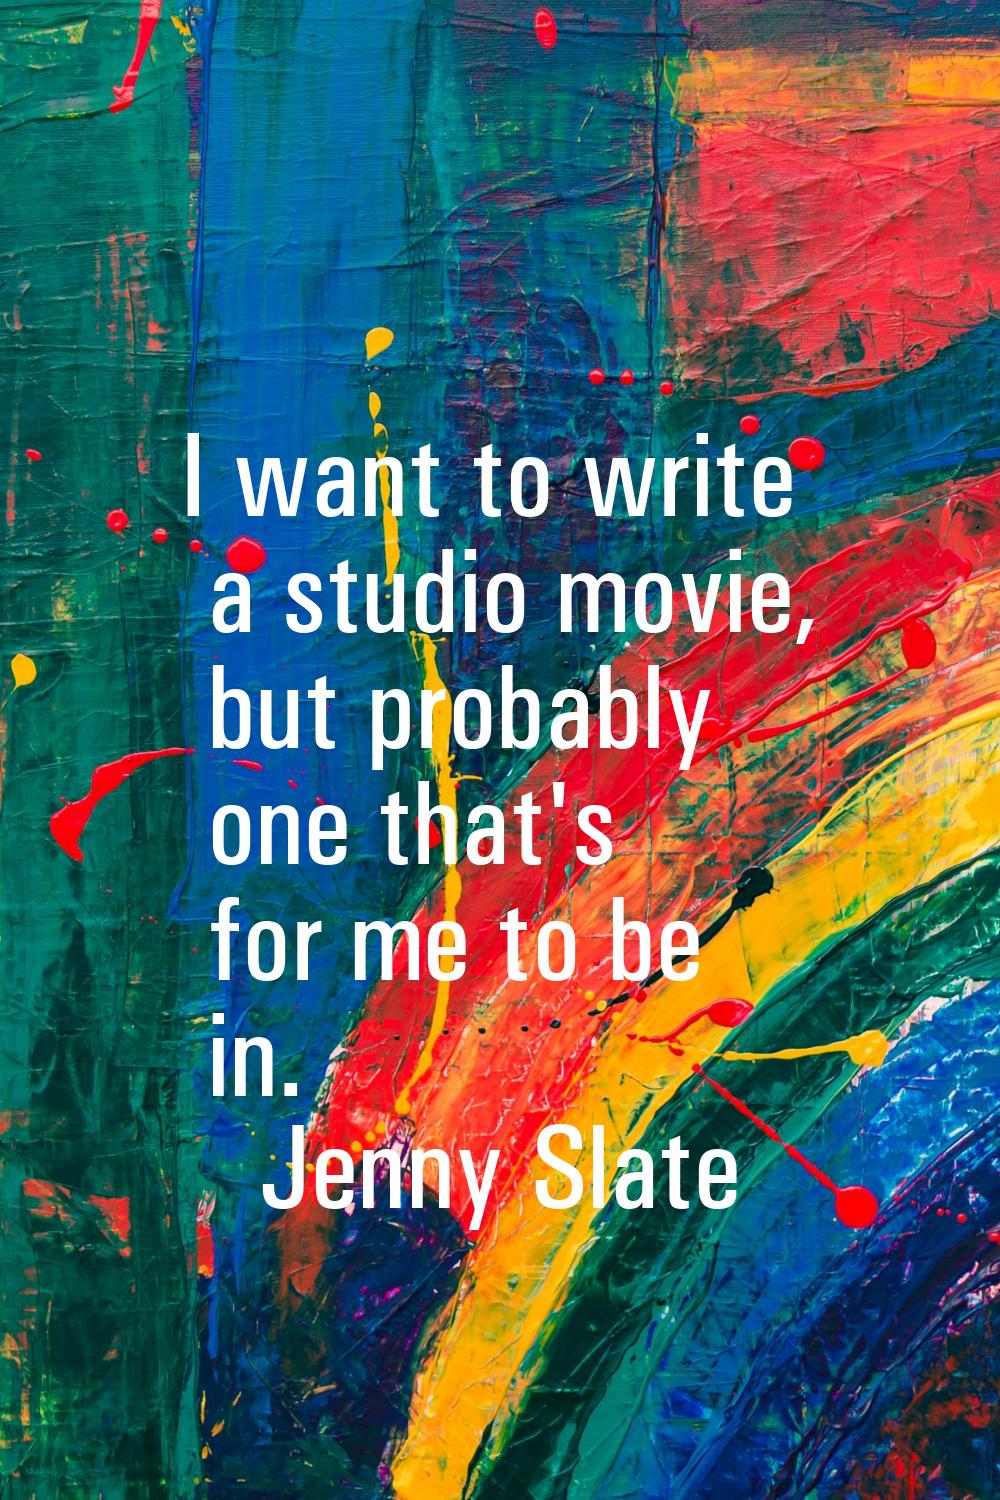 I want to write a studio movie, but probably one that's for me to be in.